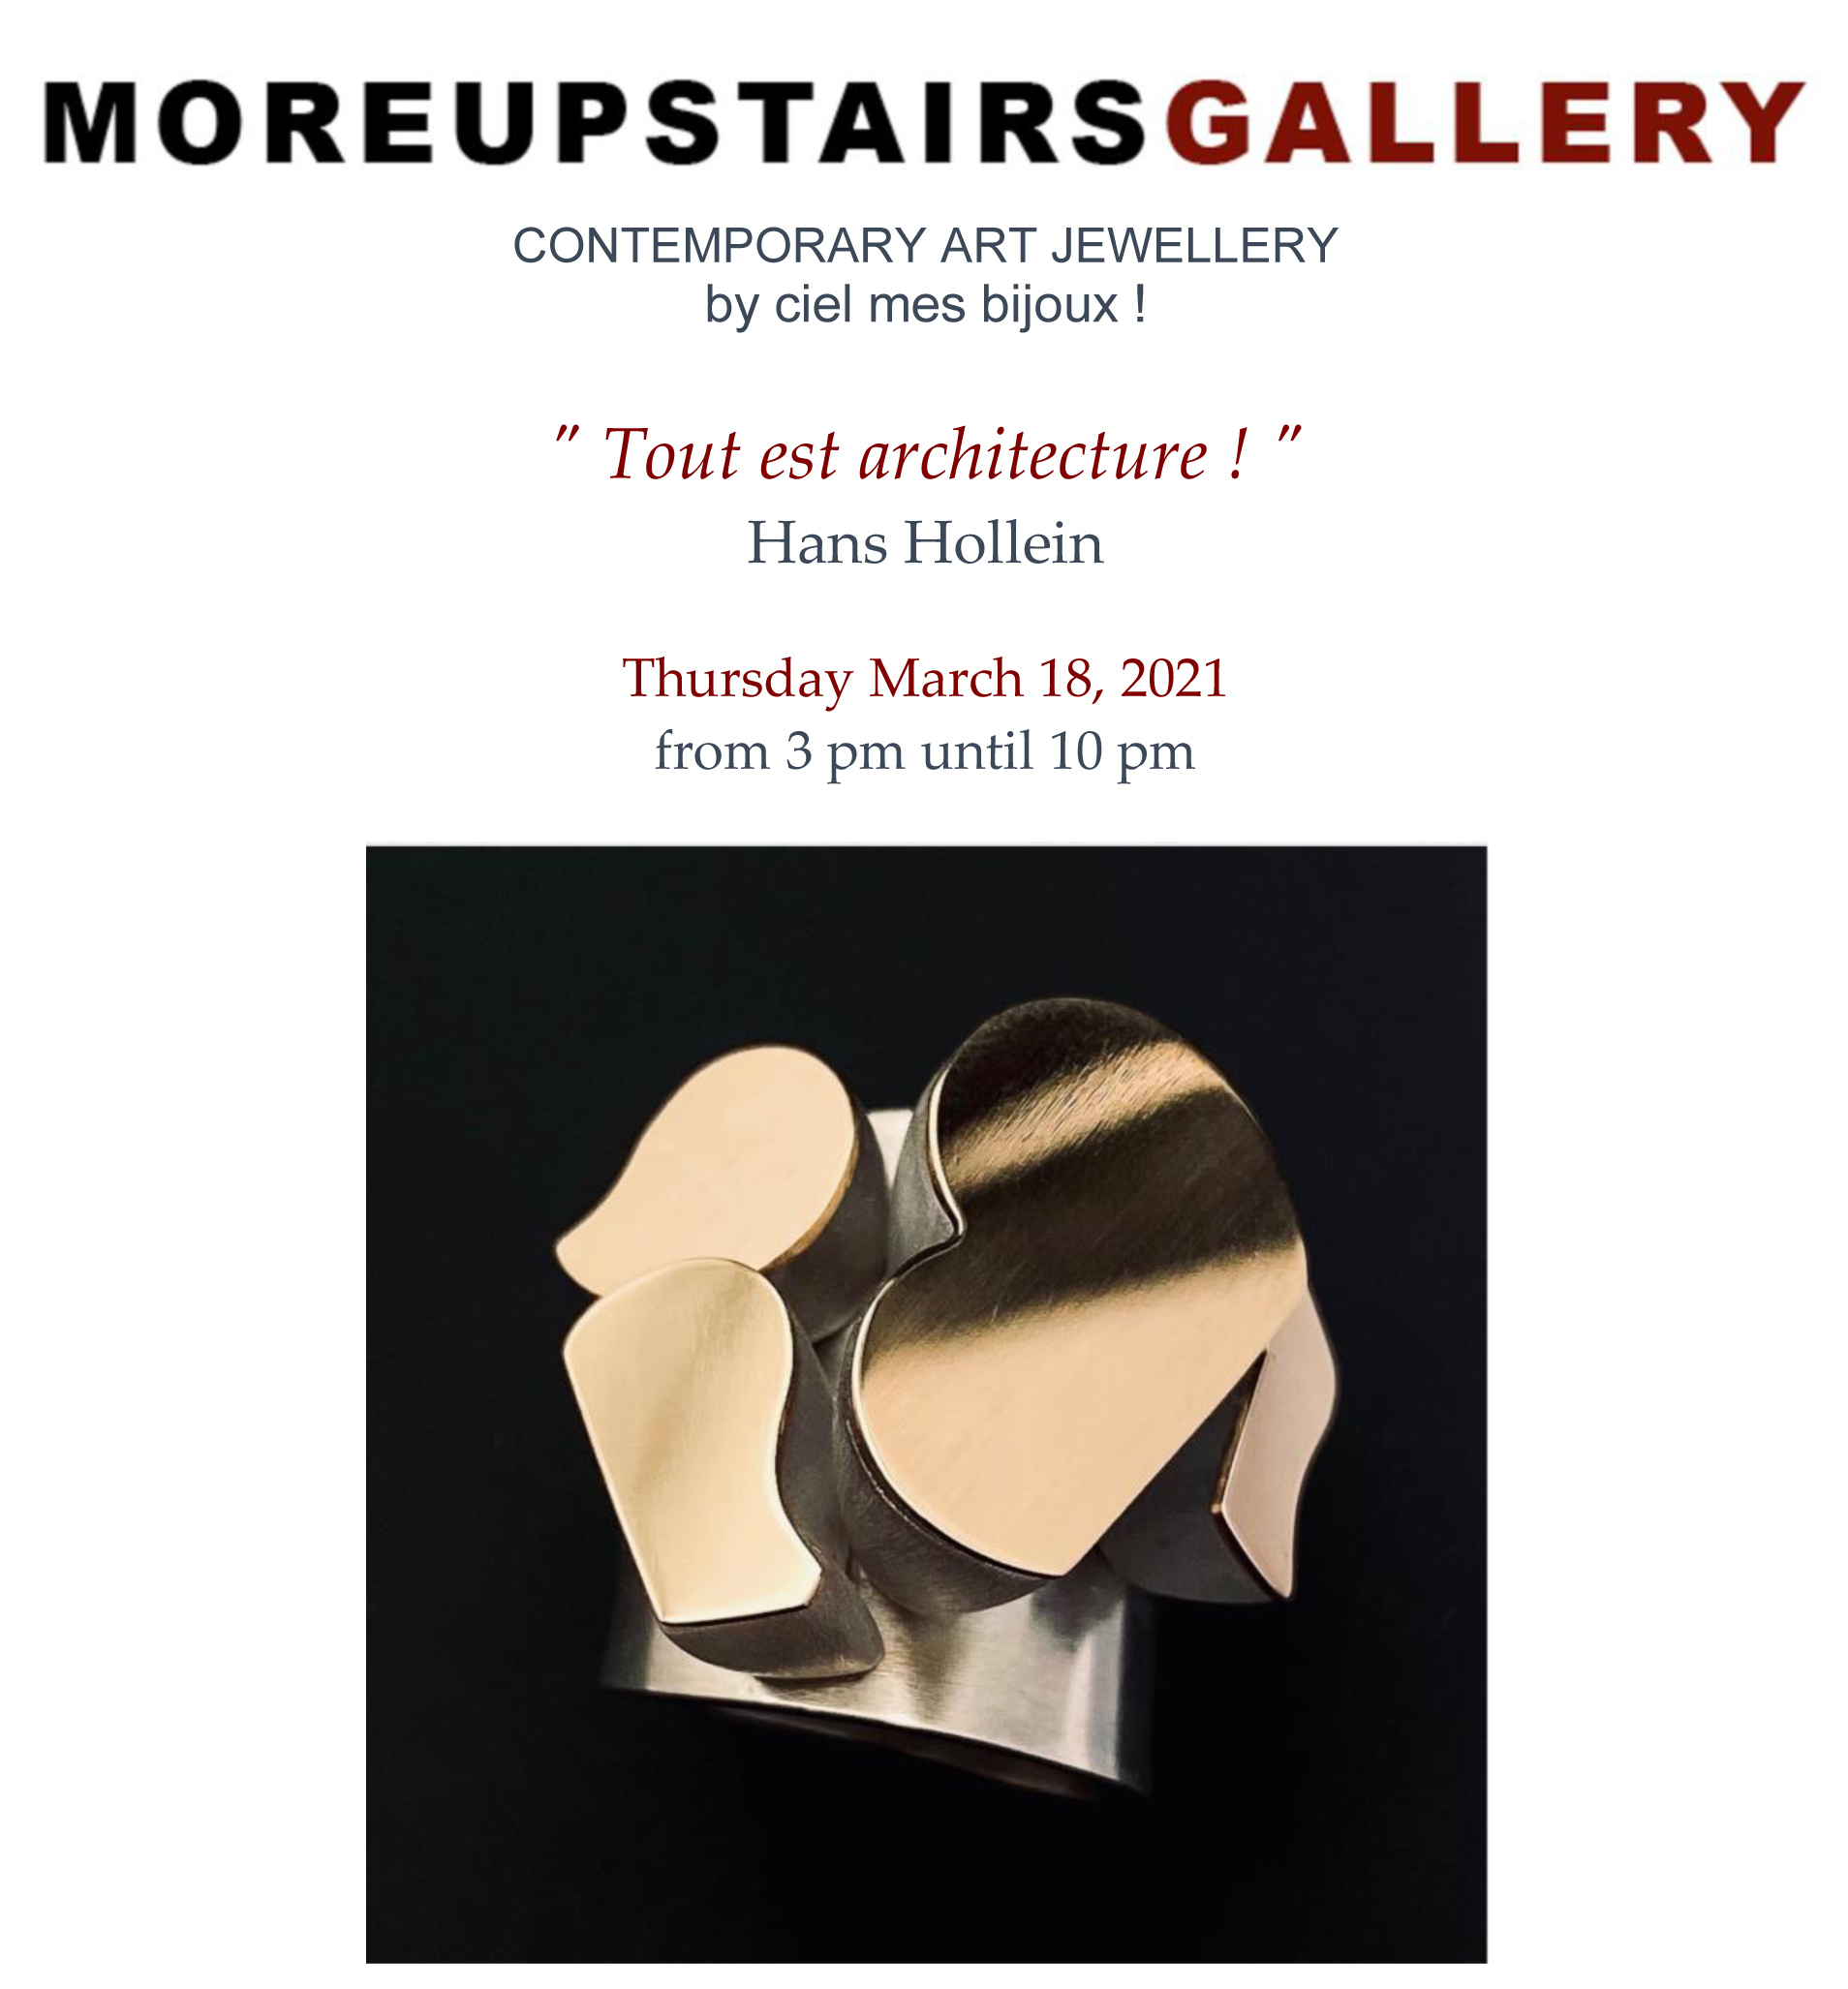 'Tout est architecture!' exposition Moreupstairs Gallery